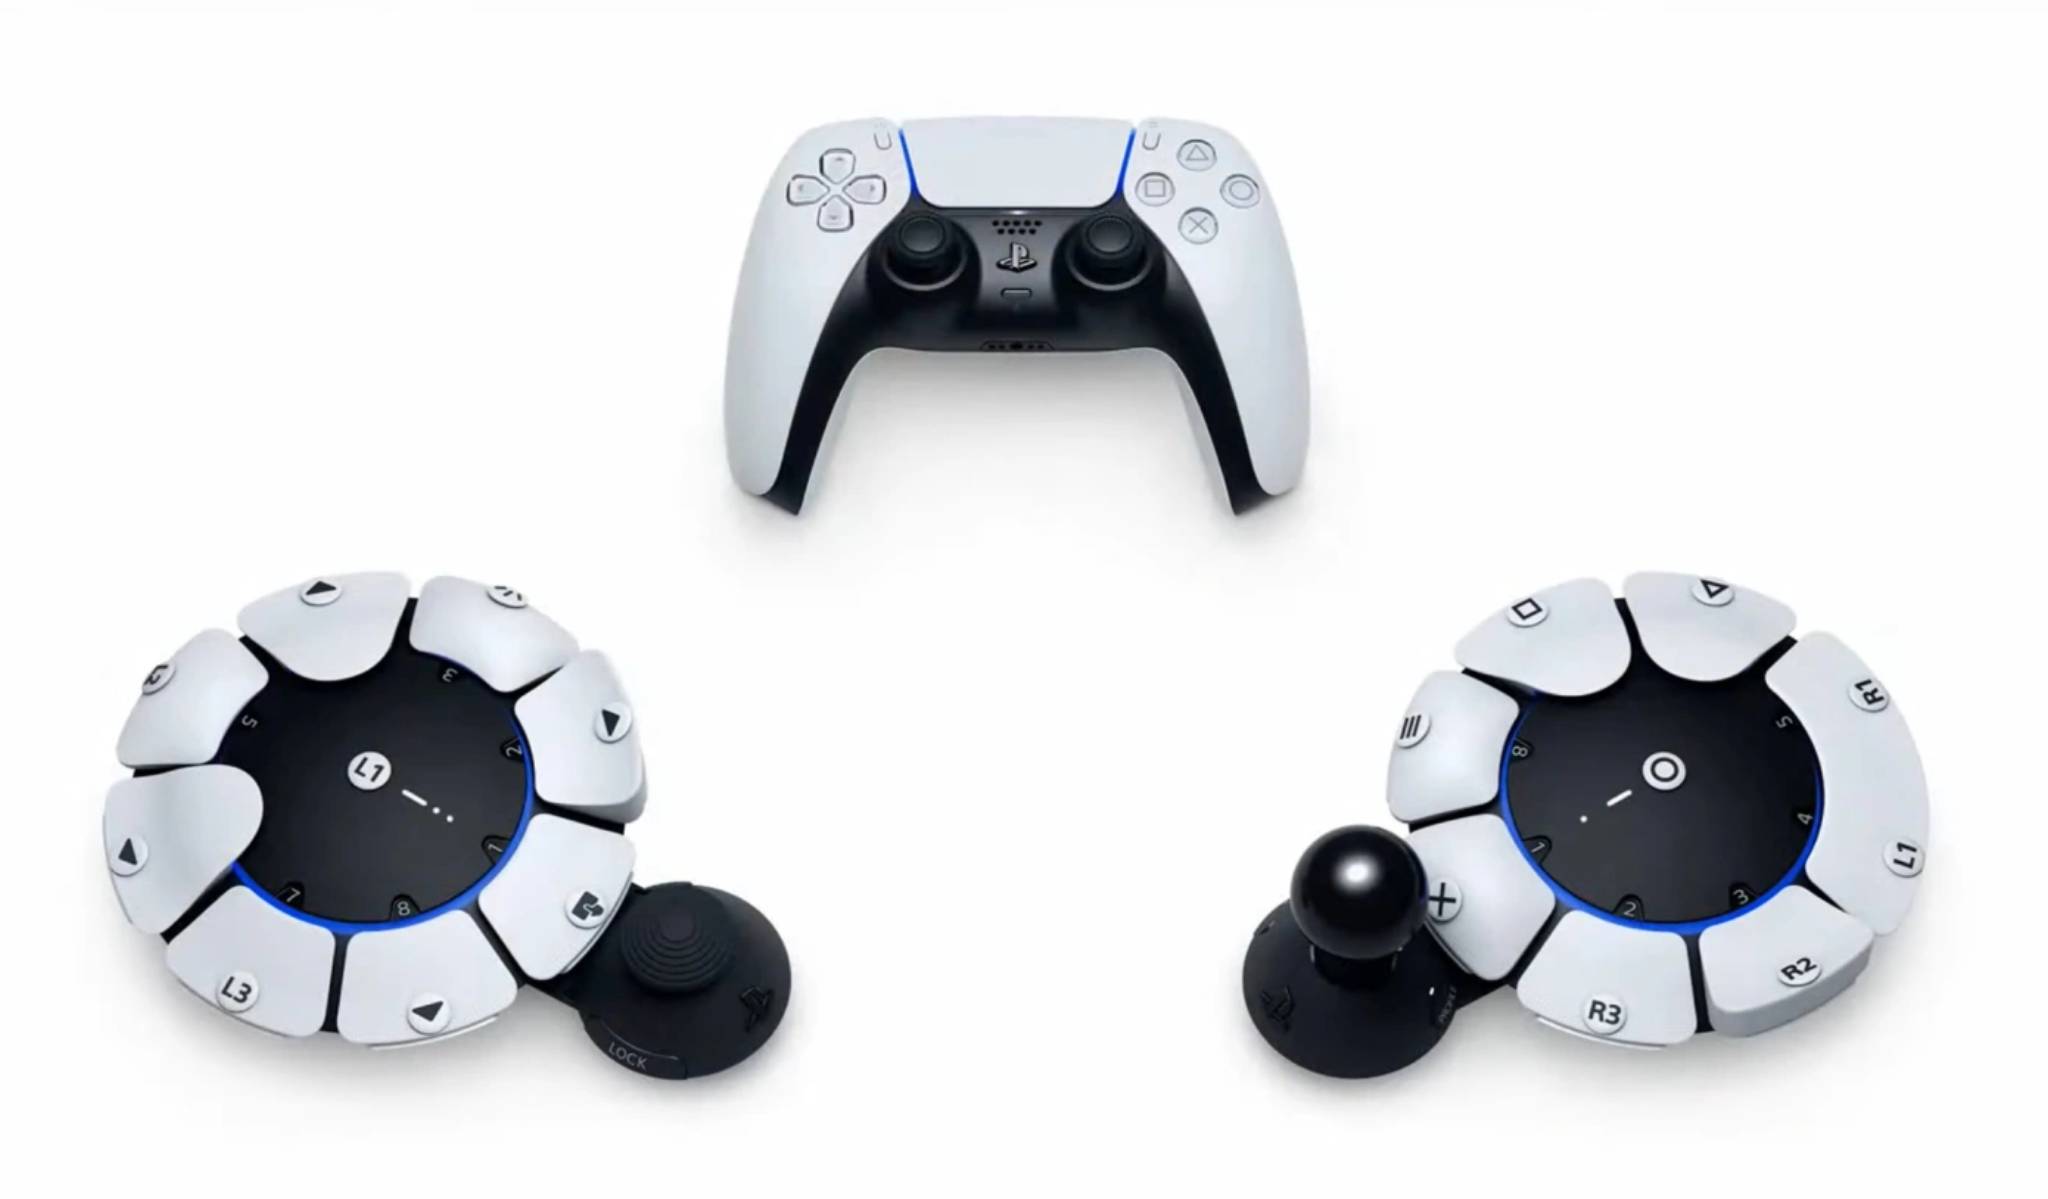 Customisable controller boosts Playstation accessibility